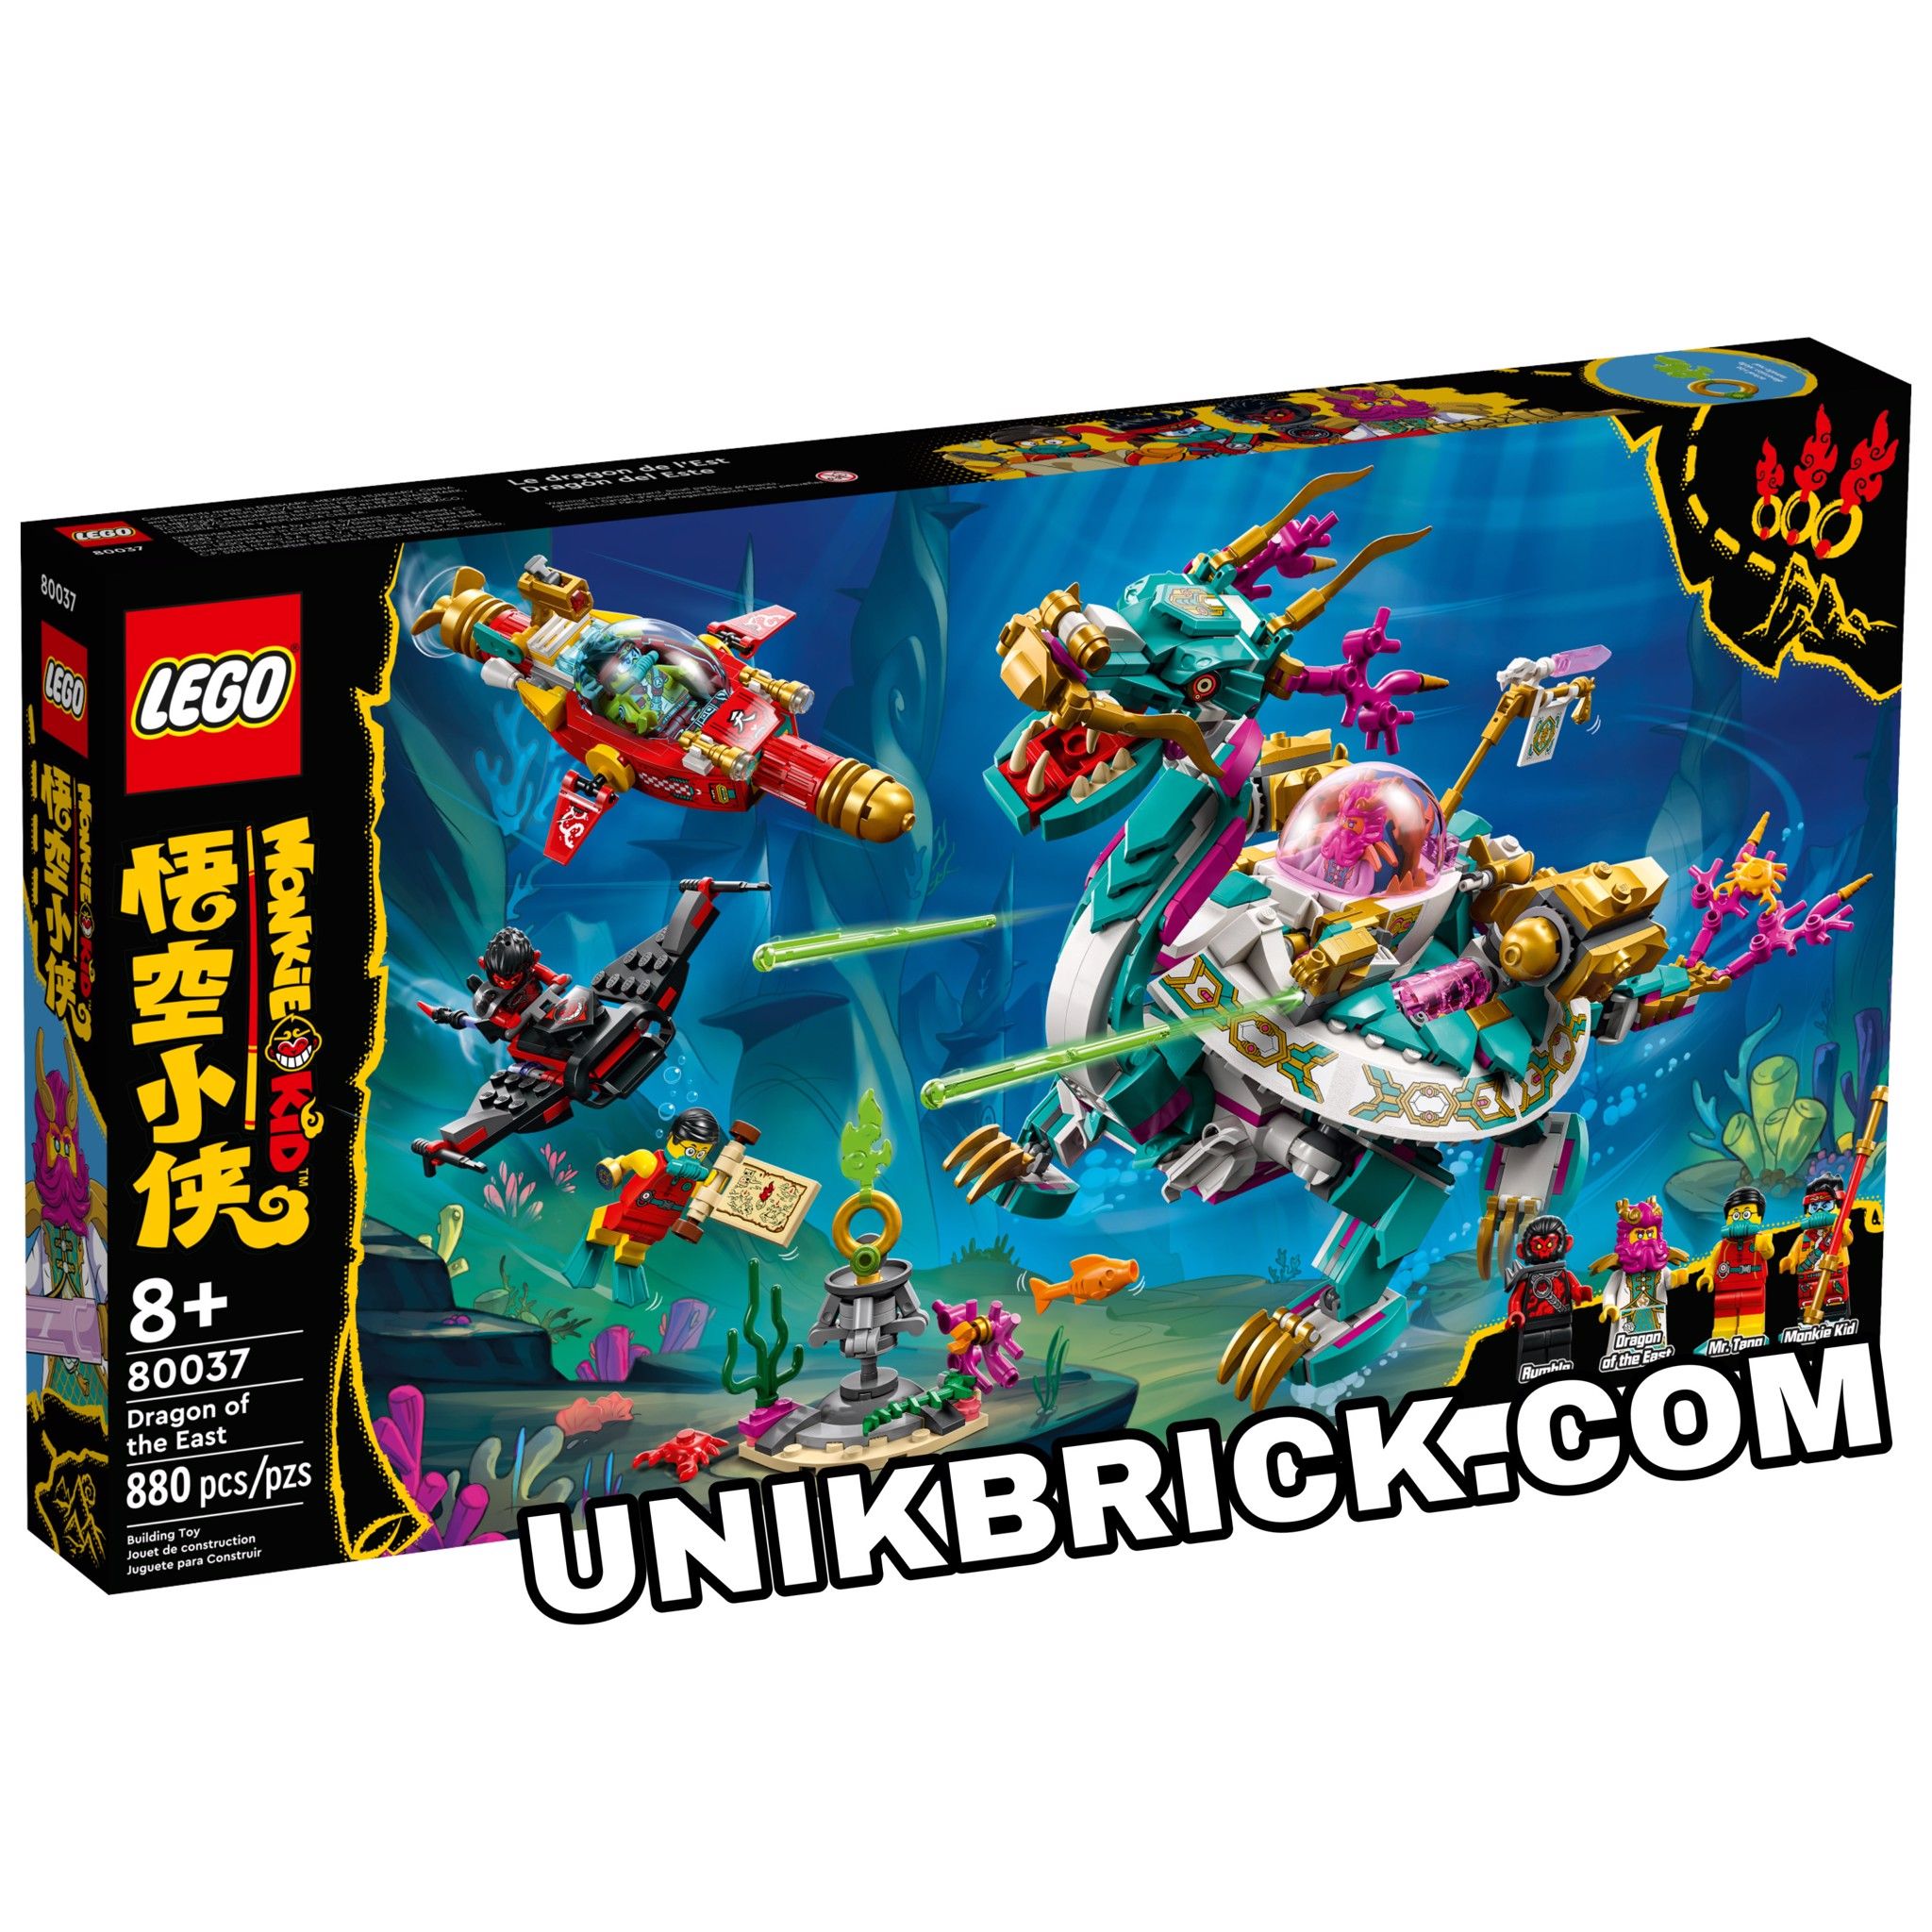 [HÀNG ĐẶT/ ORDER] LEGO Monkie Kid 80037 Dragon of the East